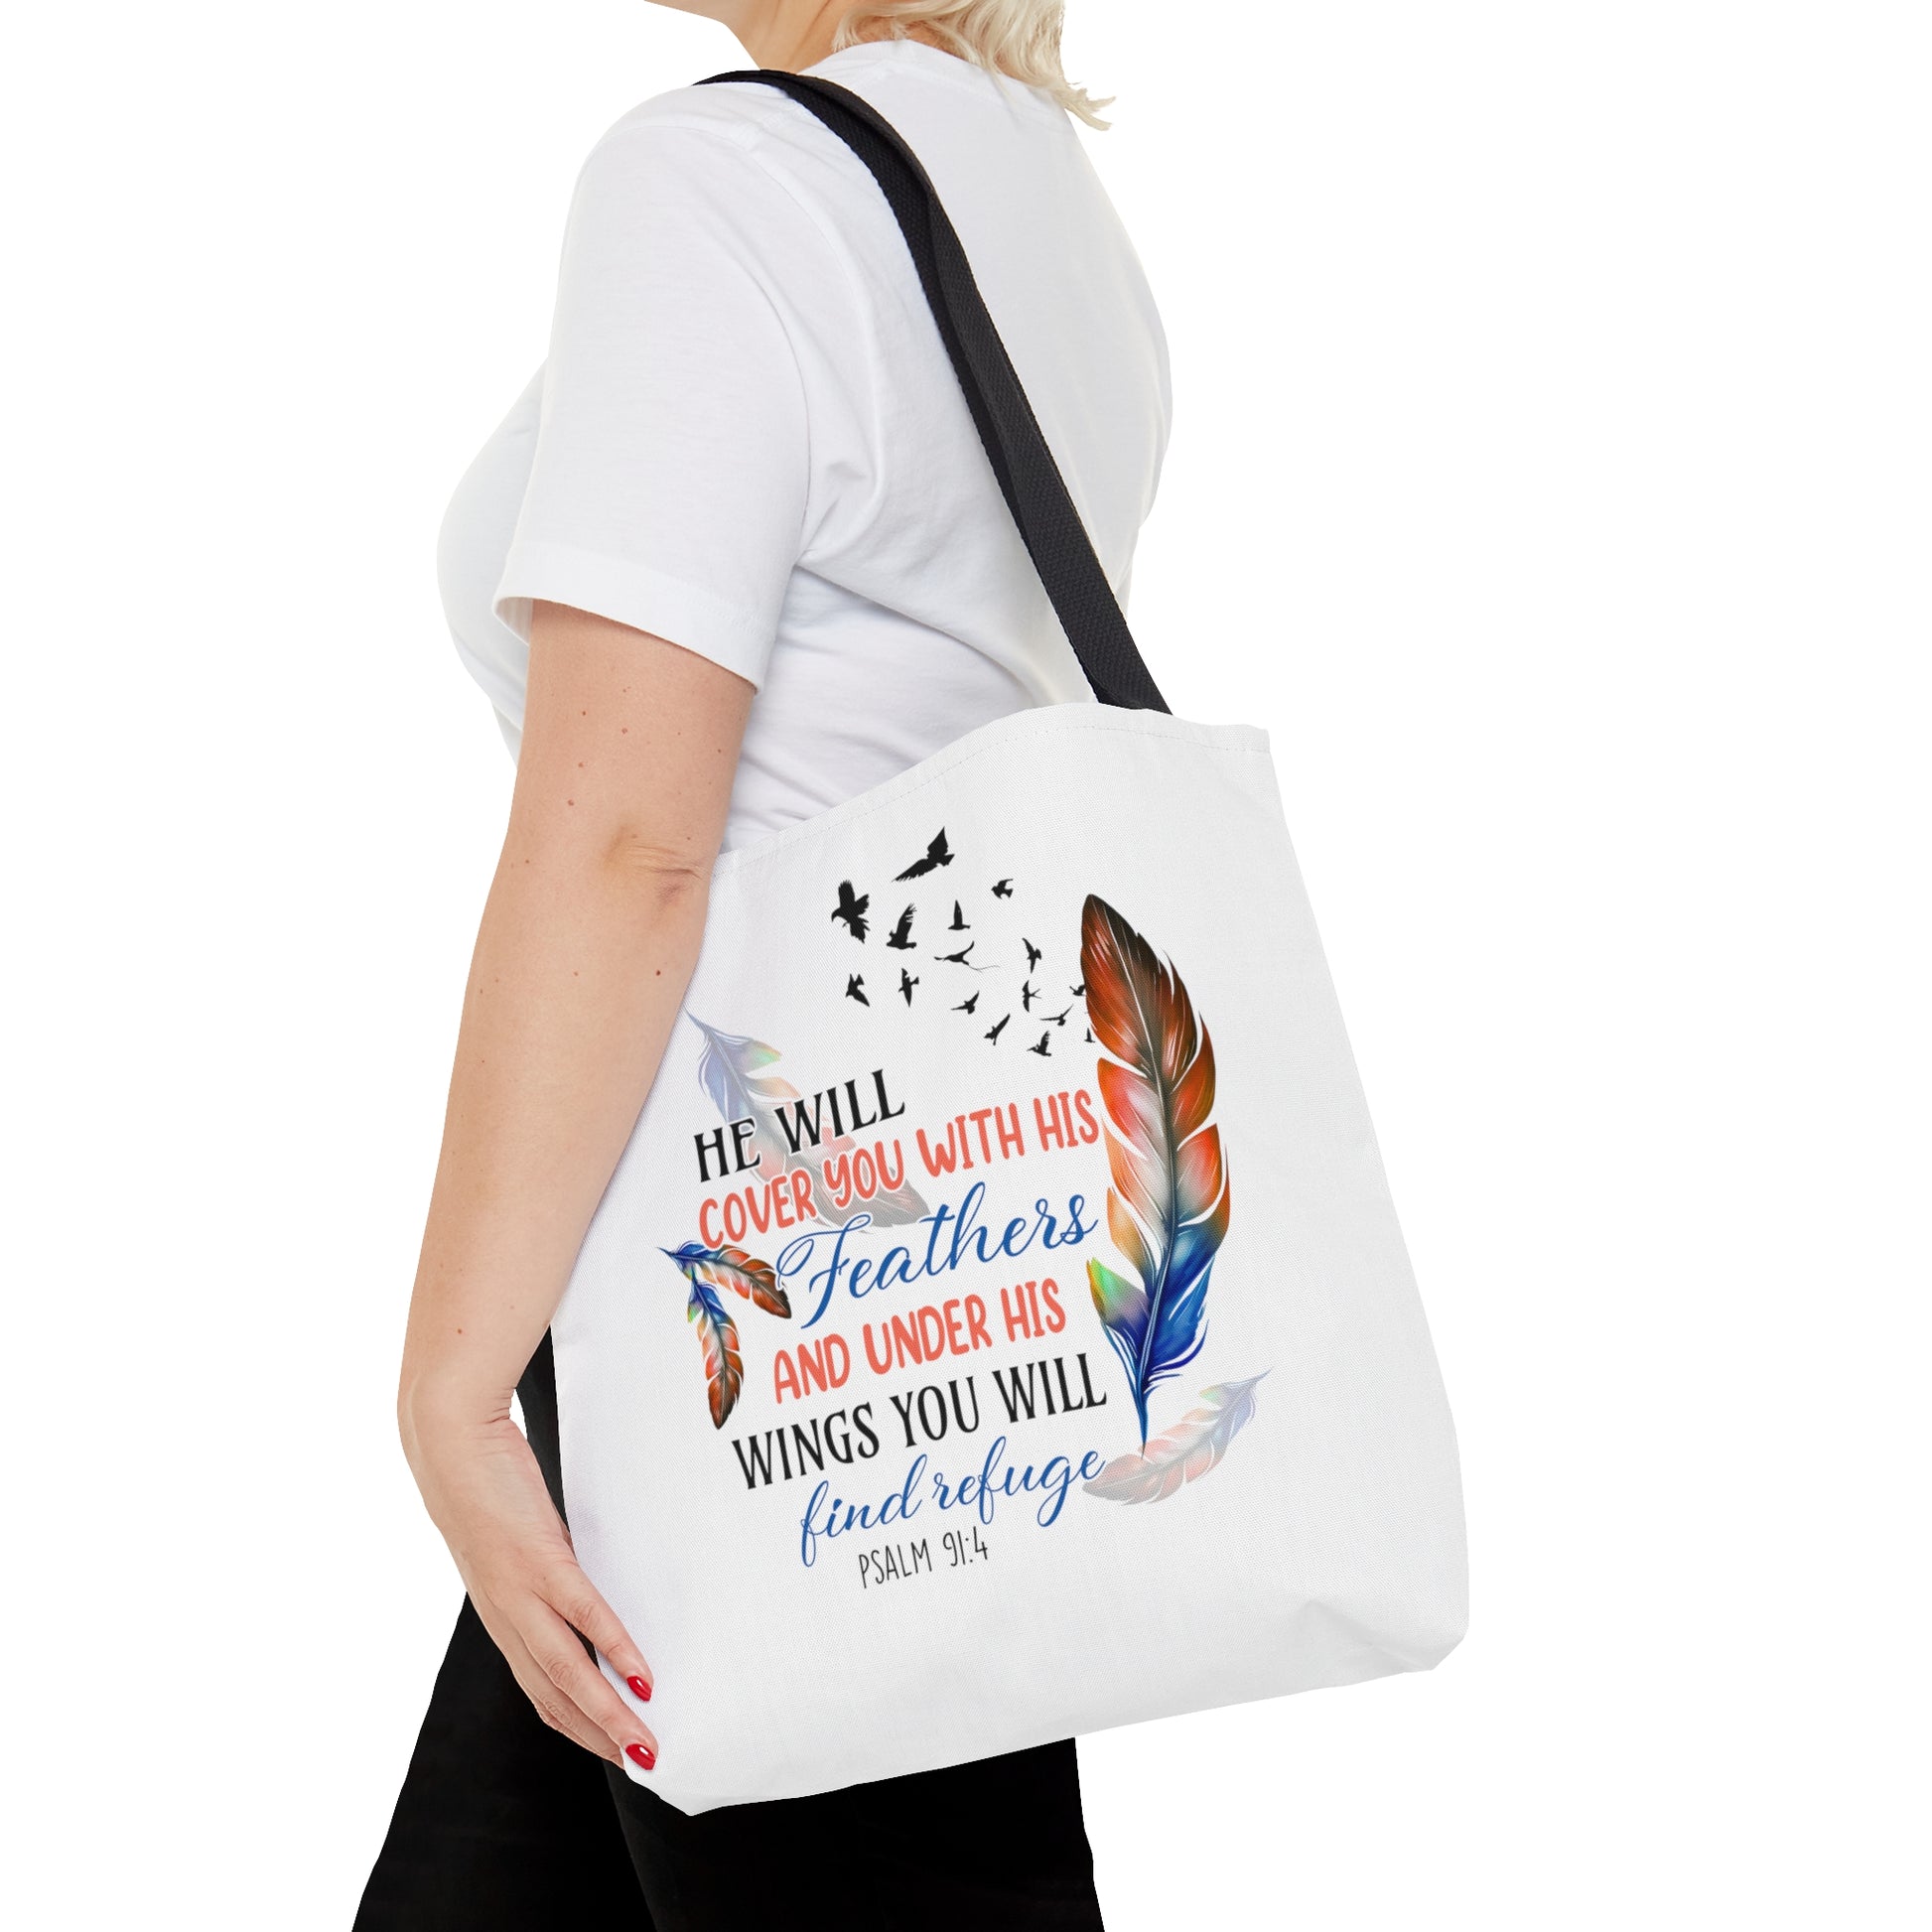 He Will Cover You Psalm 91:4 Tote Bag, Christian Gifts